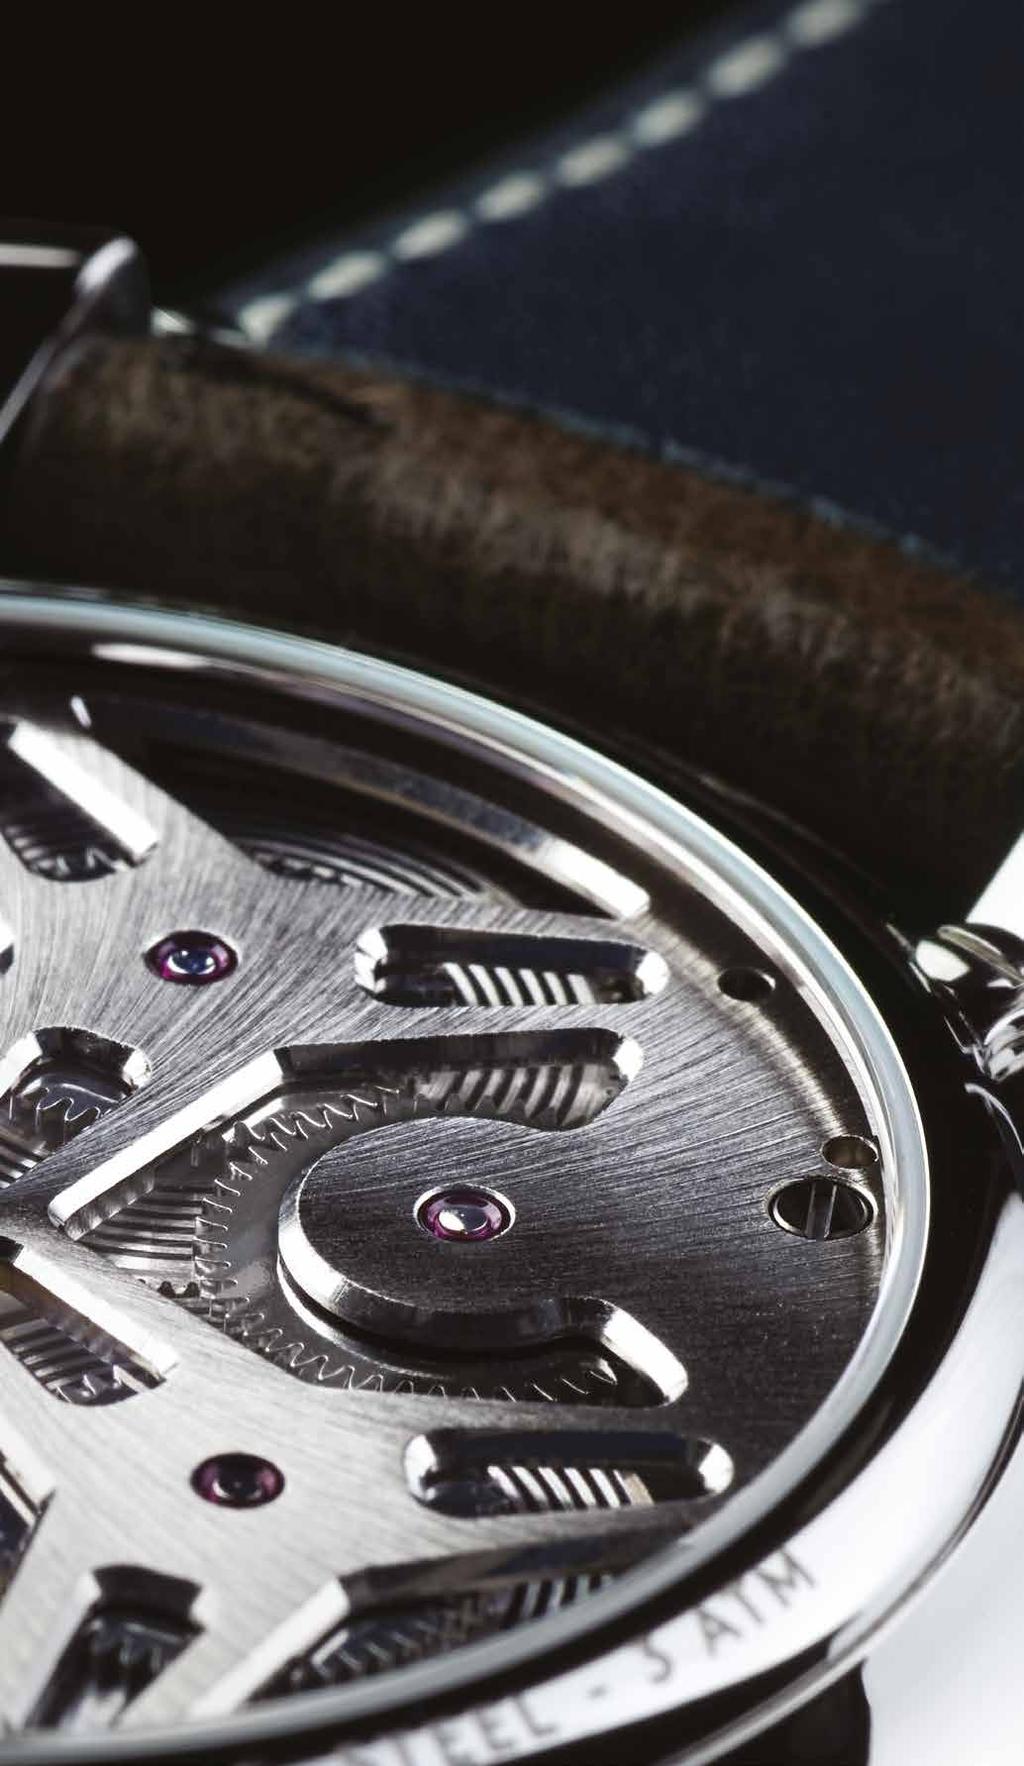 5mm 316L polished surgical-grade stainless steel case with brushed sides Push-down crown with Morgan logotype